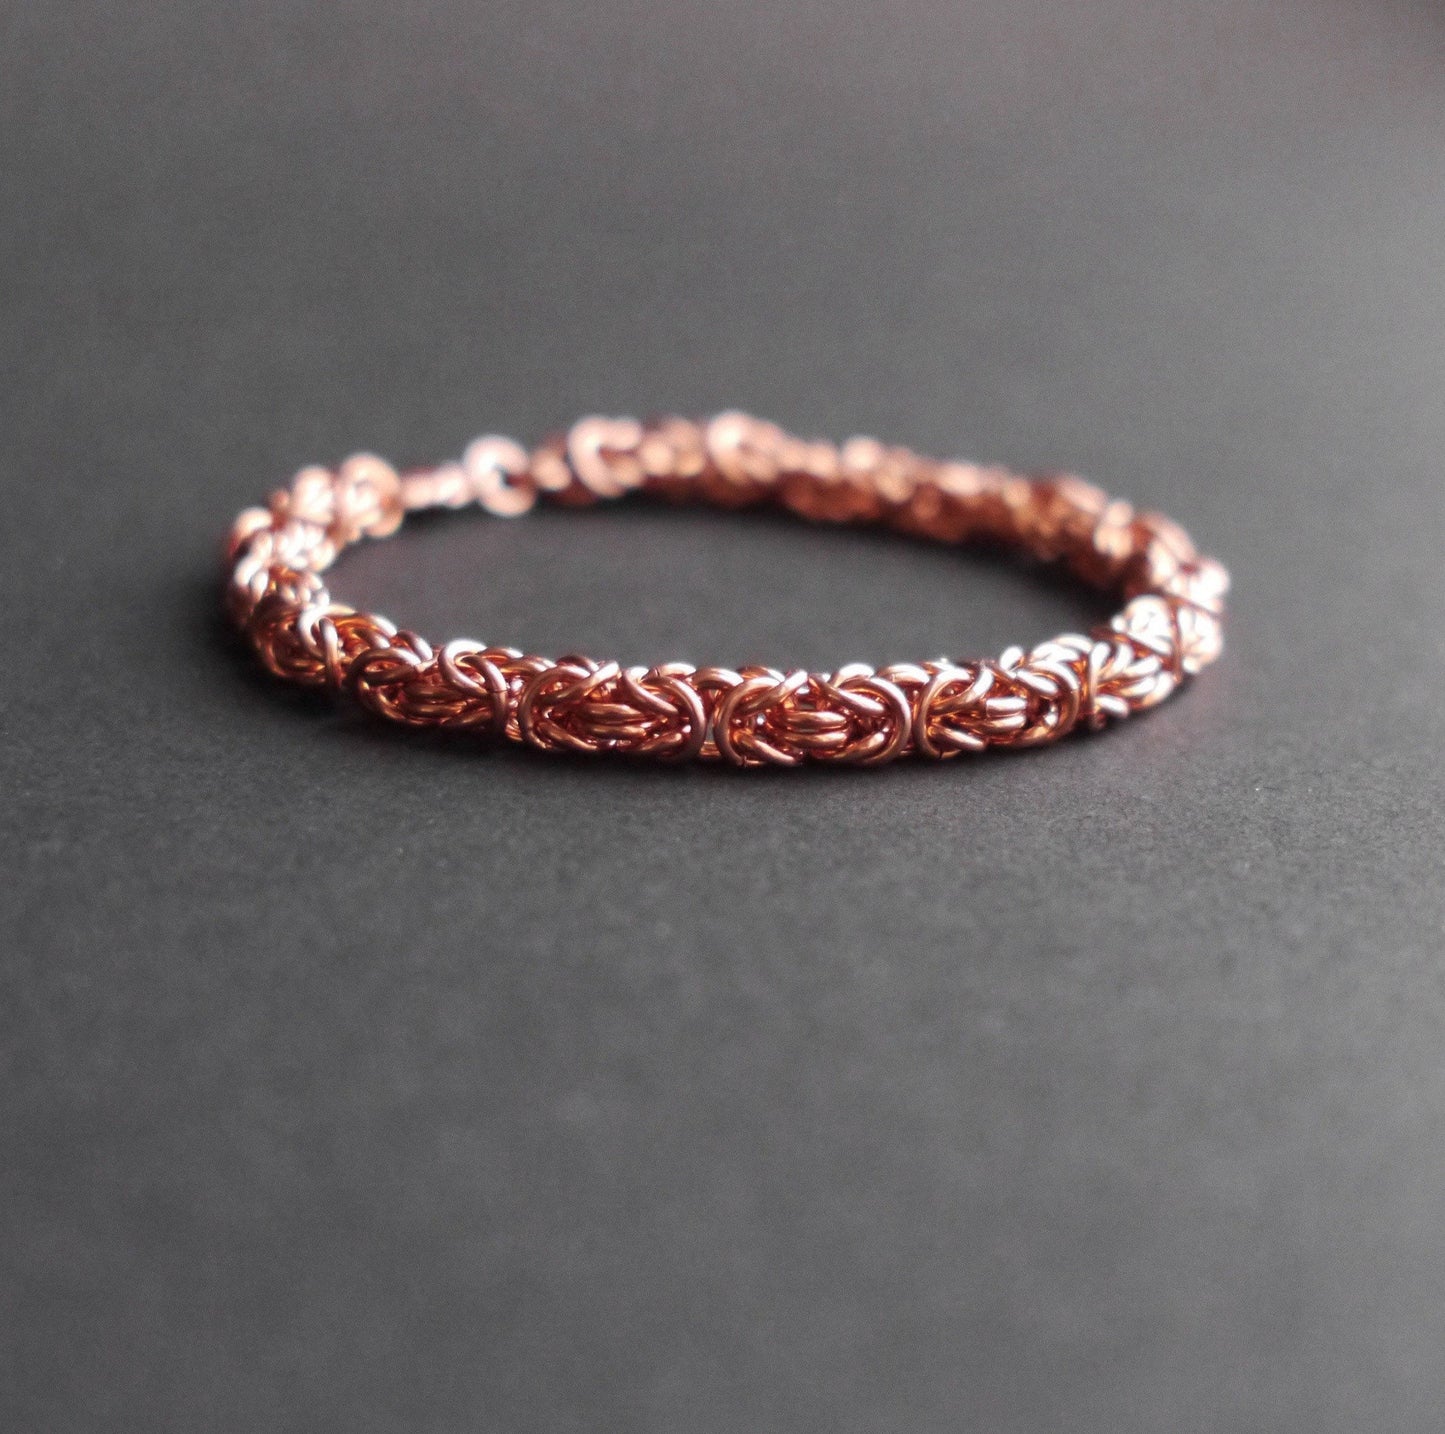 6mm Byzantine Chainmaille Bracelet in Copper